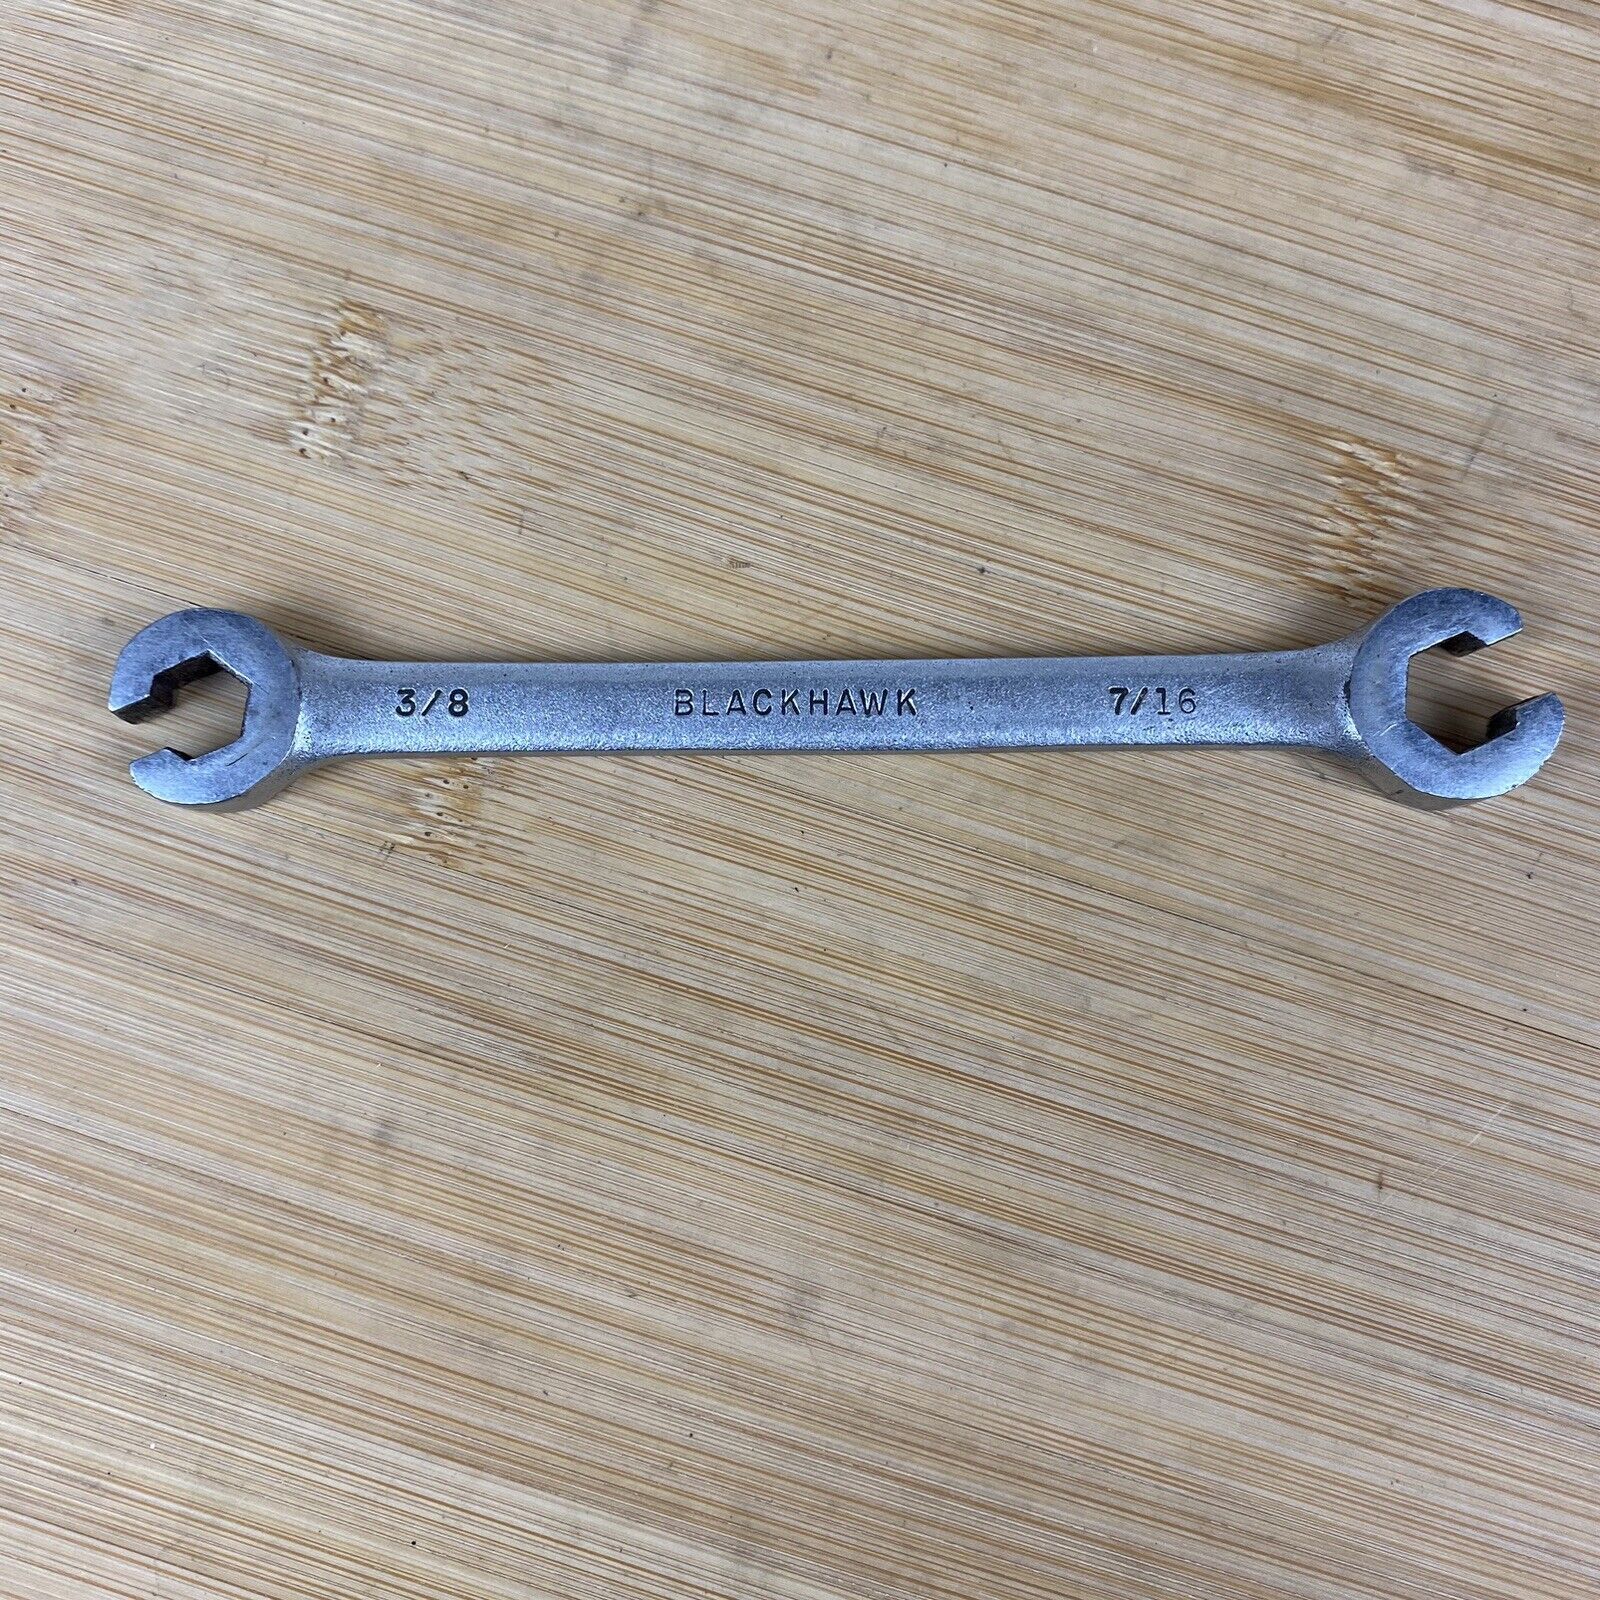 Blackhawk Tools 3/8 X 7/16 Flare Nut Line Double End Wrench 6 Point Usa Zw-1214